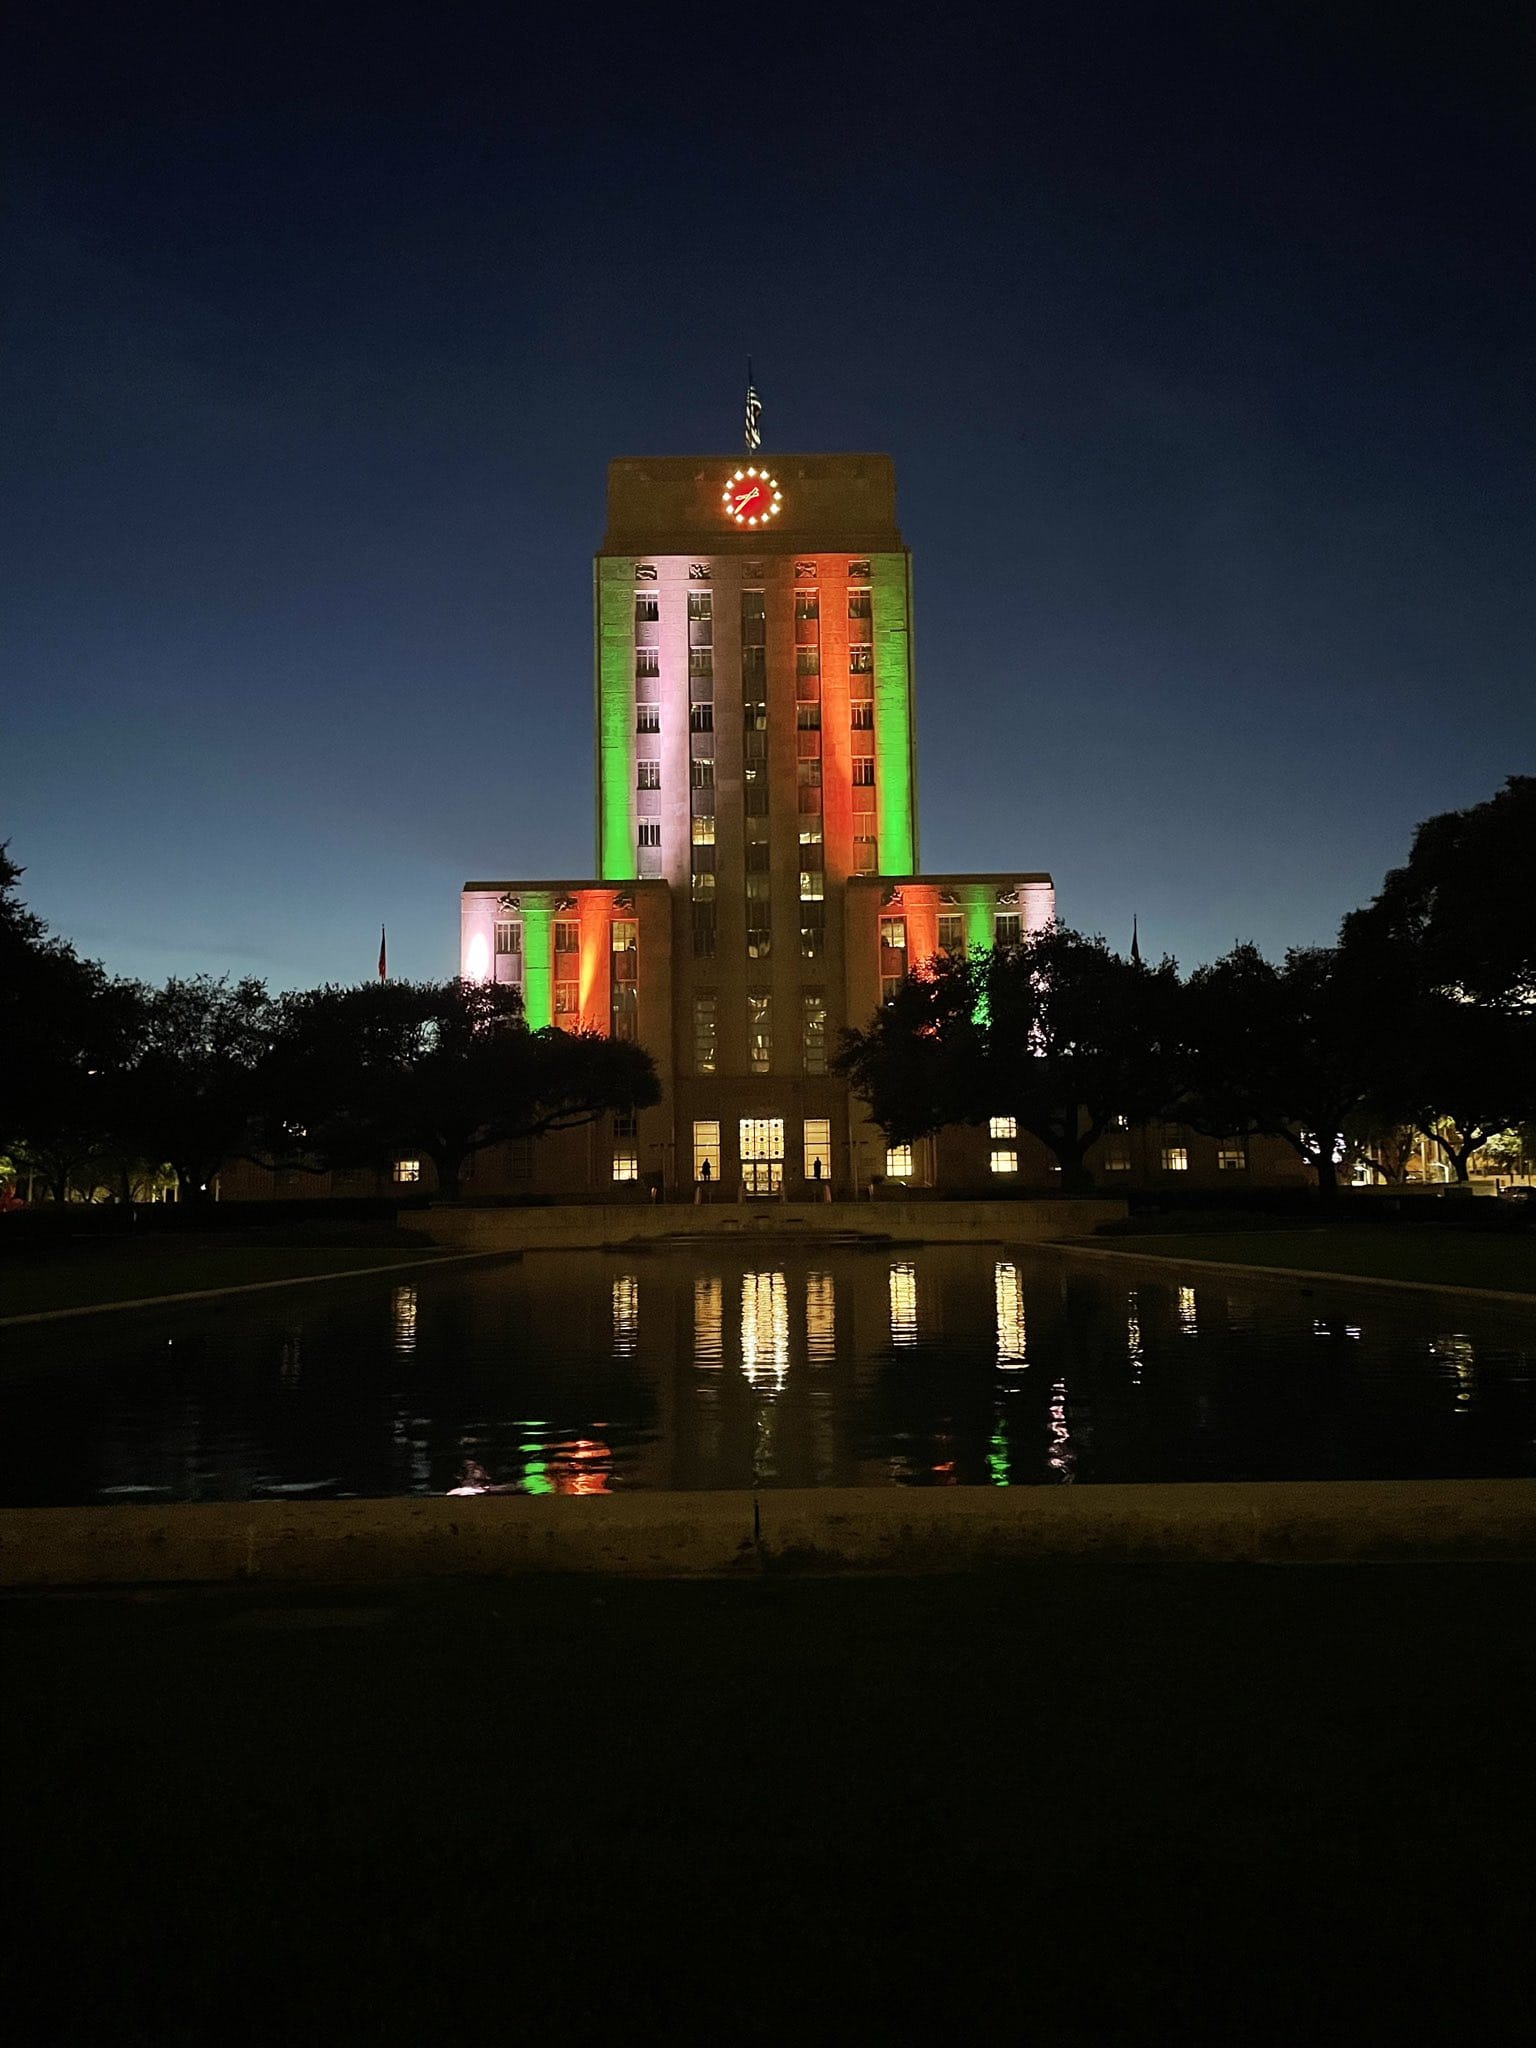 City of Houston lit up the City Hall with the colors of the Indian National flag to commemorate 75 years of India's Independence on August 15,2022